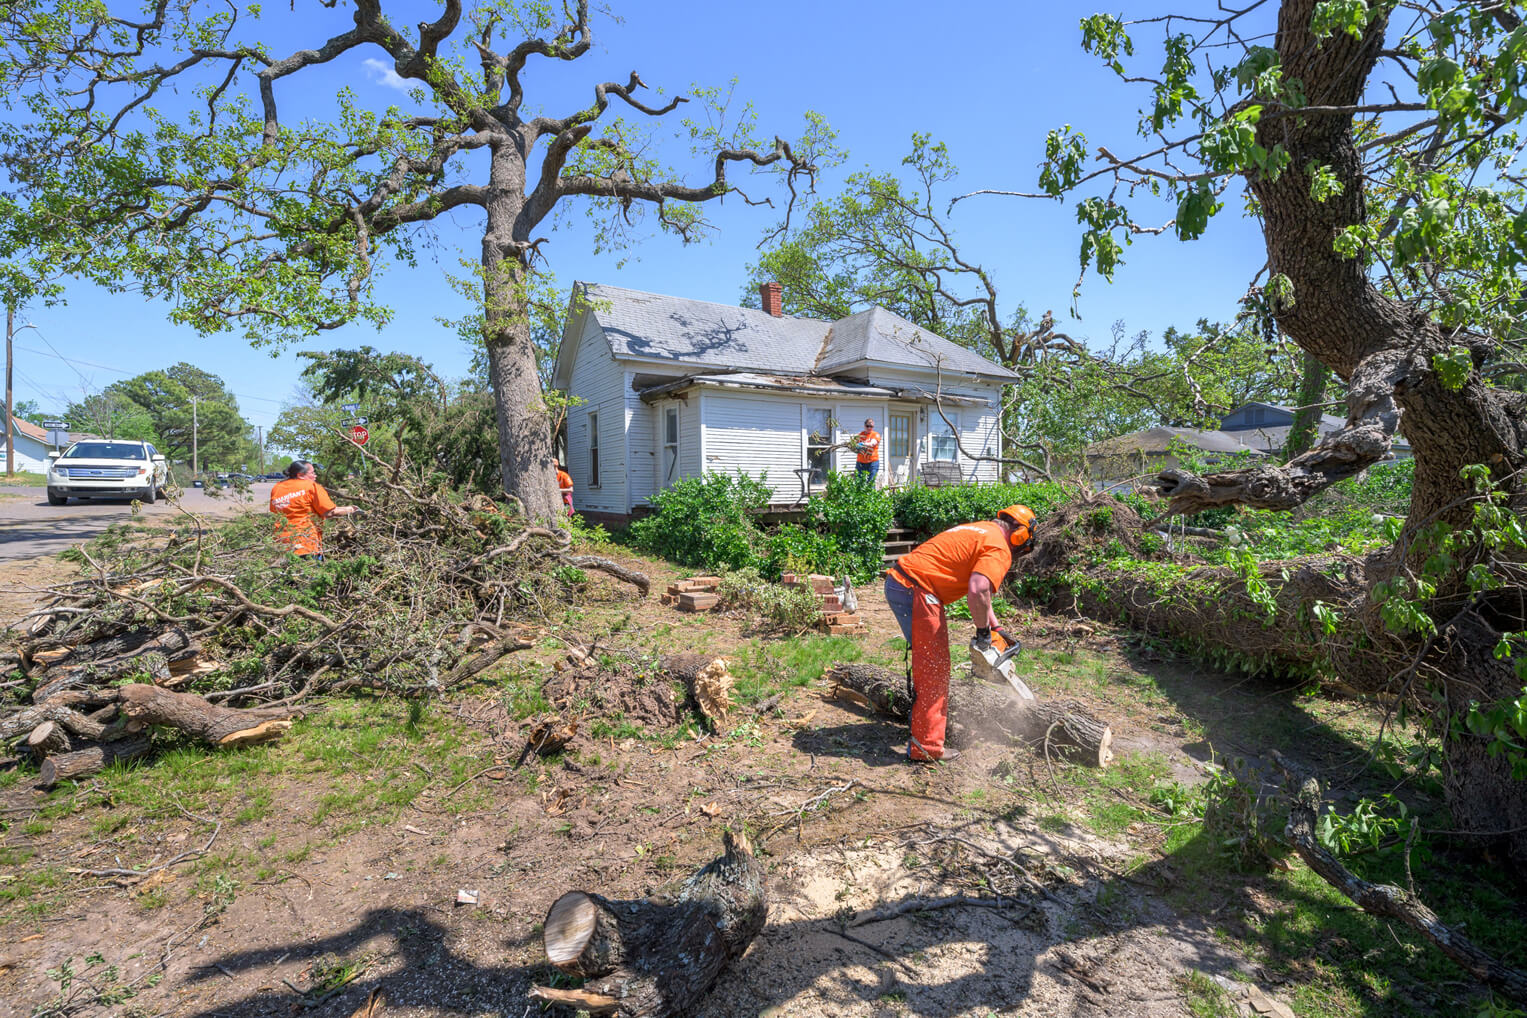 A tornado took down large trees on the property of Kathy Phelps in Shawnee, Oklahoma.